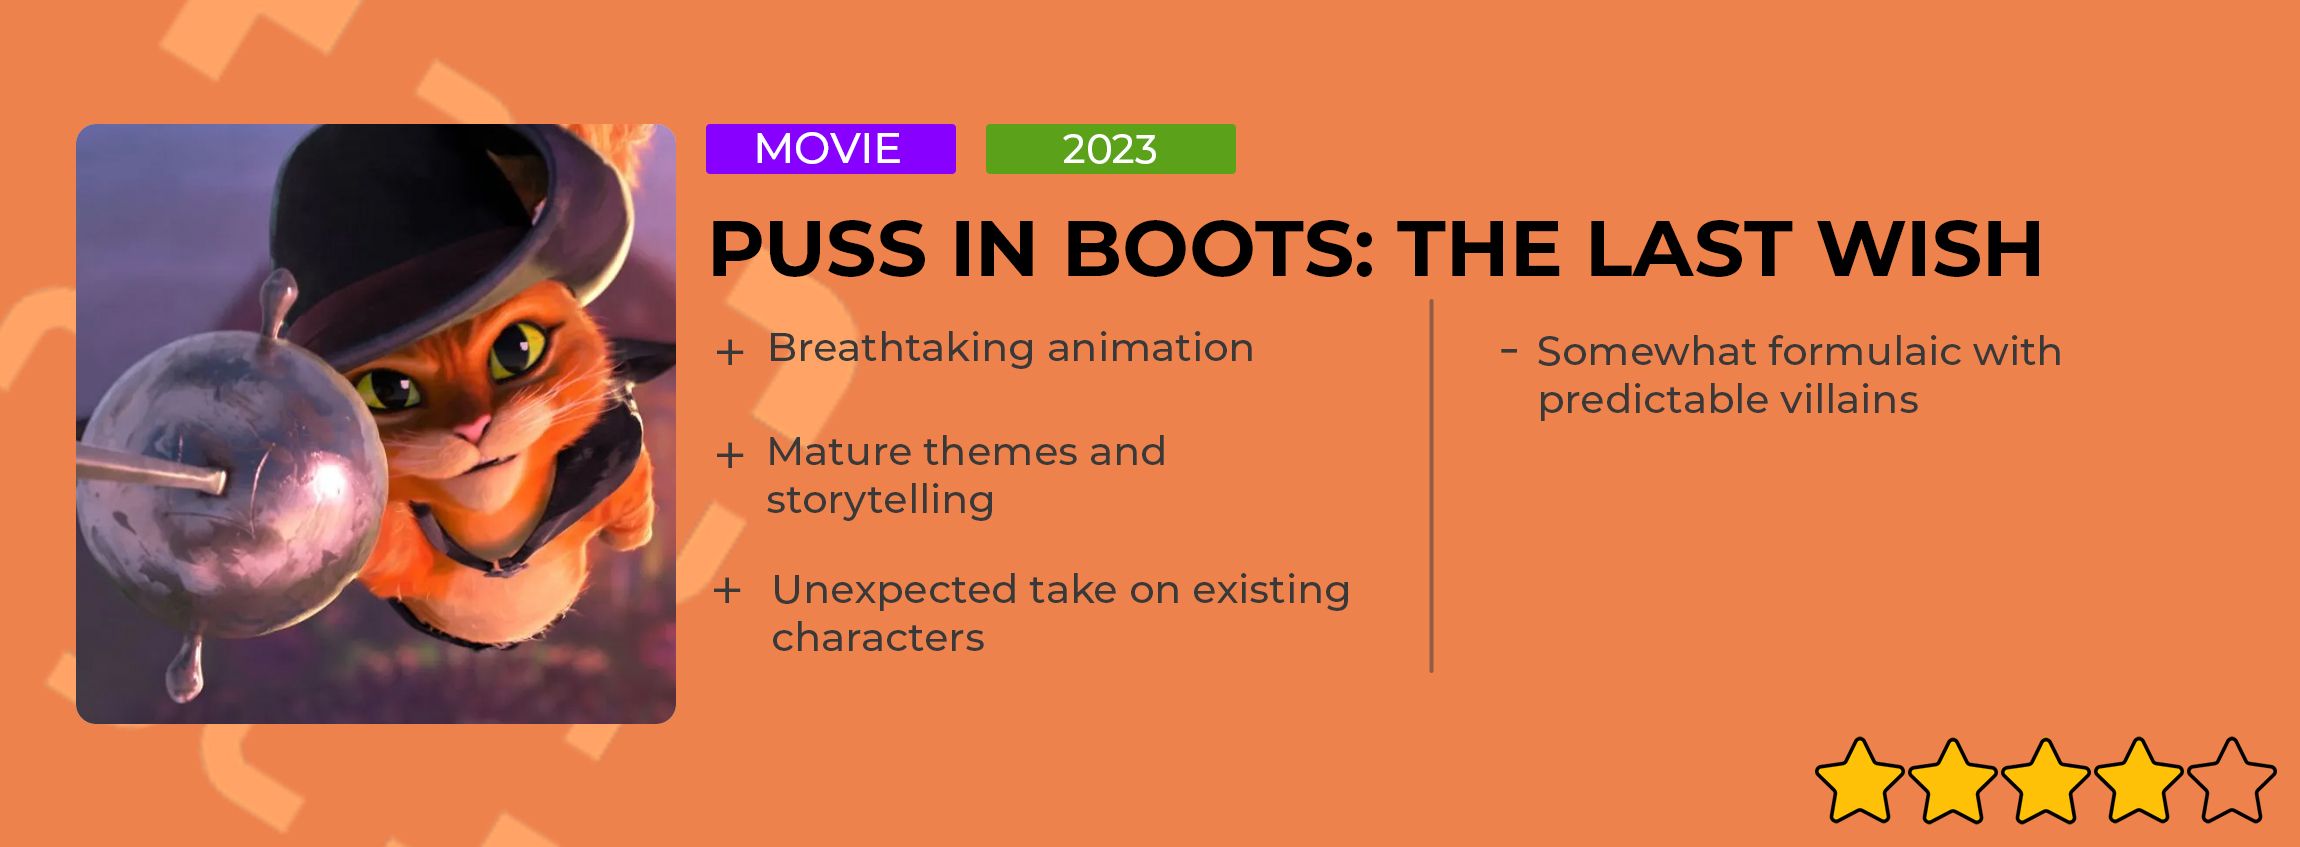 Puss in Boots review card